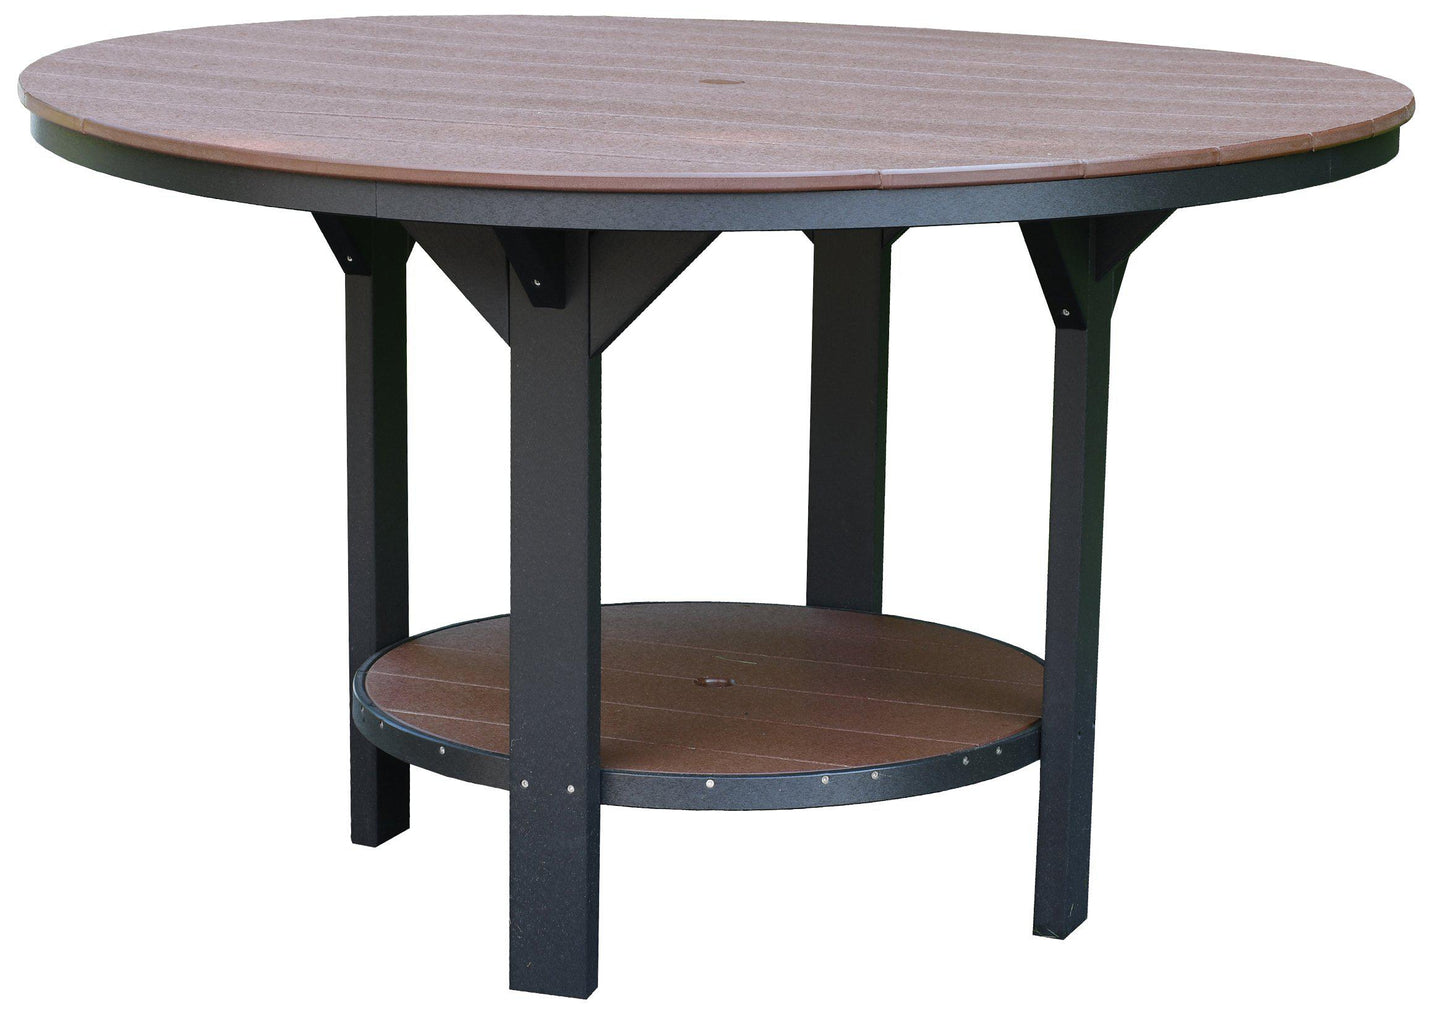 Wildridge Recycled Plastic Heritage Outdoor 60" Pub Table (COUNTER HEIGHT) - LEAD TIME TO SHIP 4 WEEKS